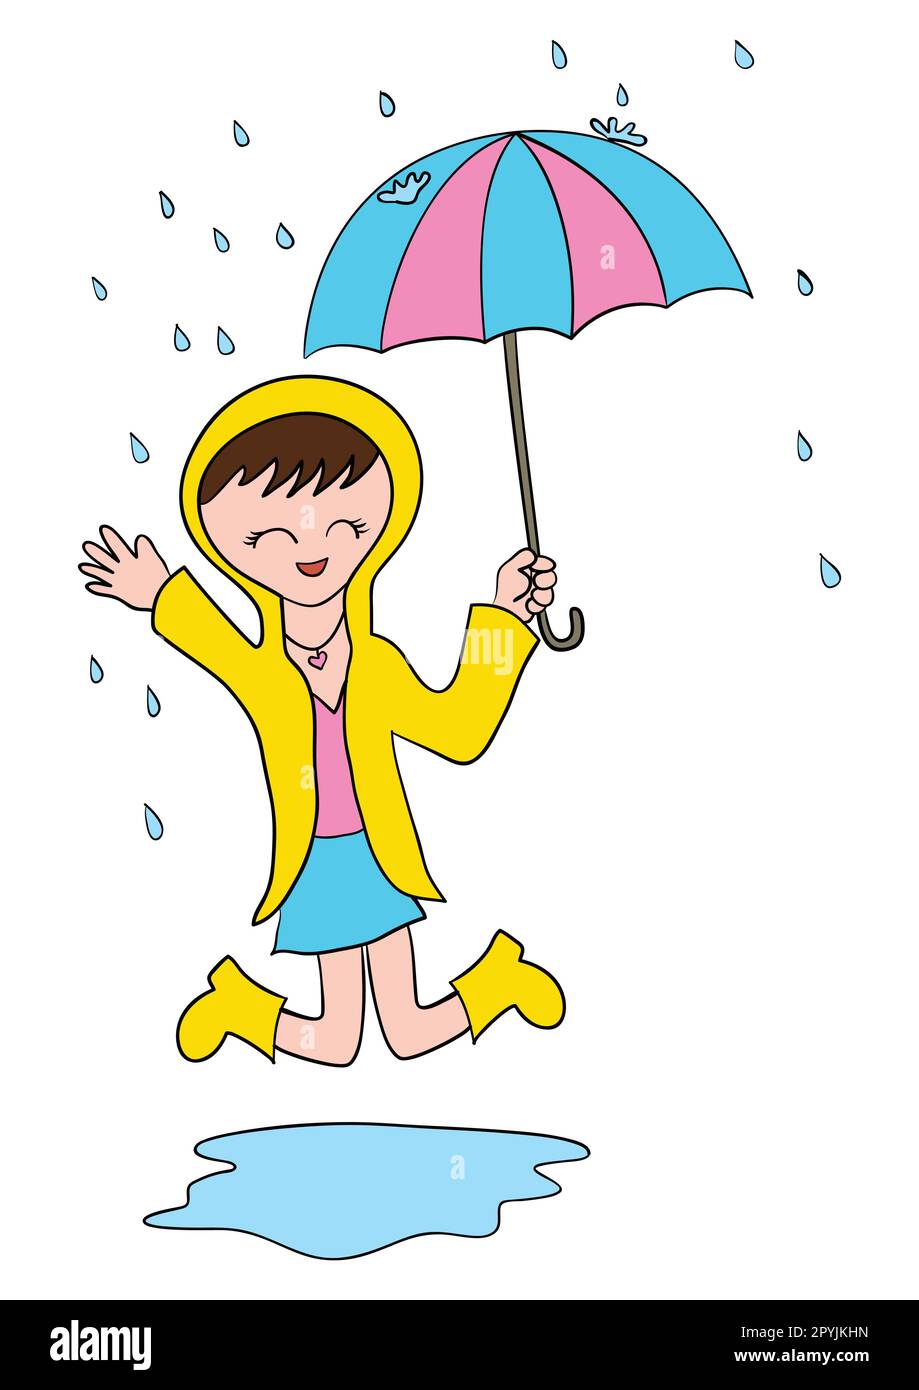 Cartoon illustration of a girl playing in the rain with umbrella Stock ...